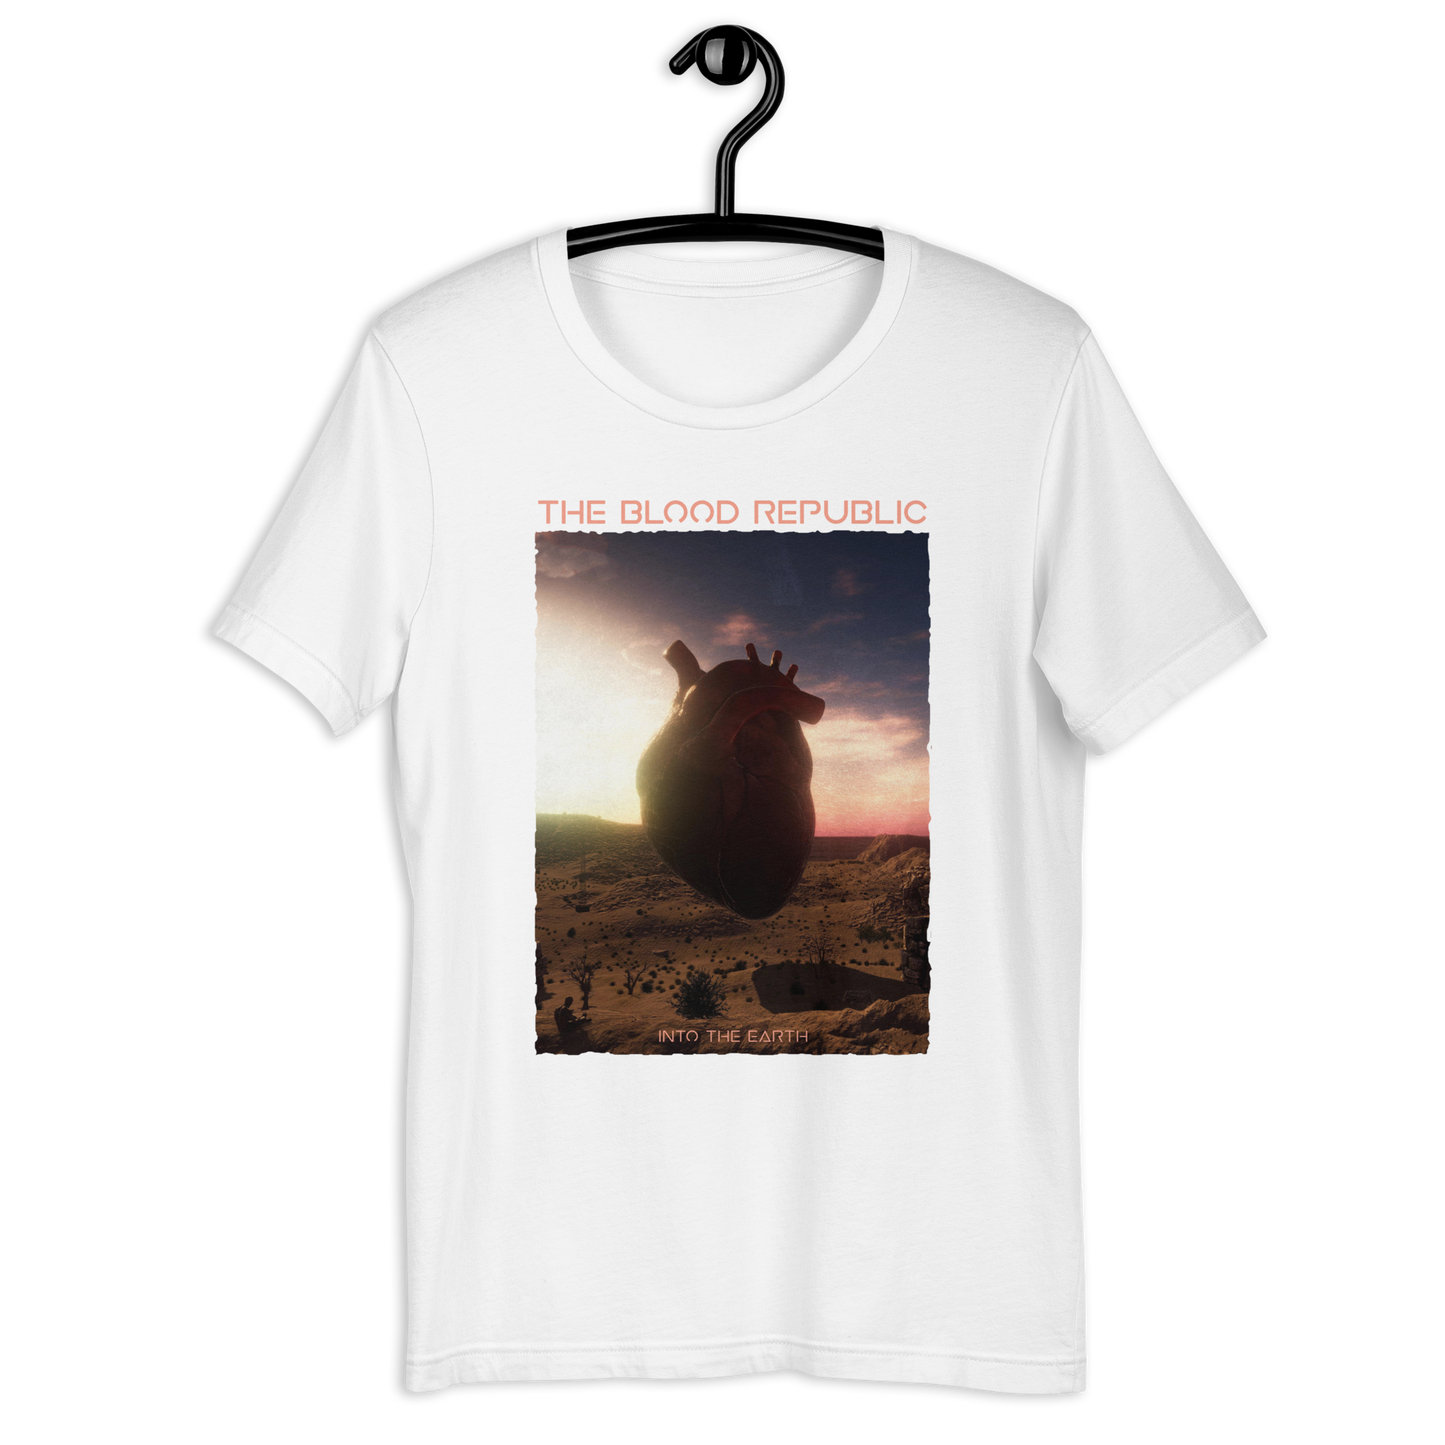 BLOOD REPUBLIC - INTO THE EARTH ARTWORK T-SHIRT